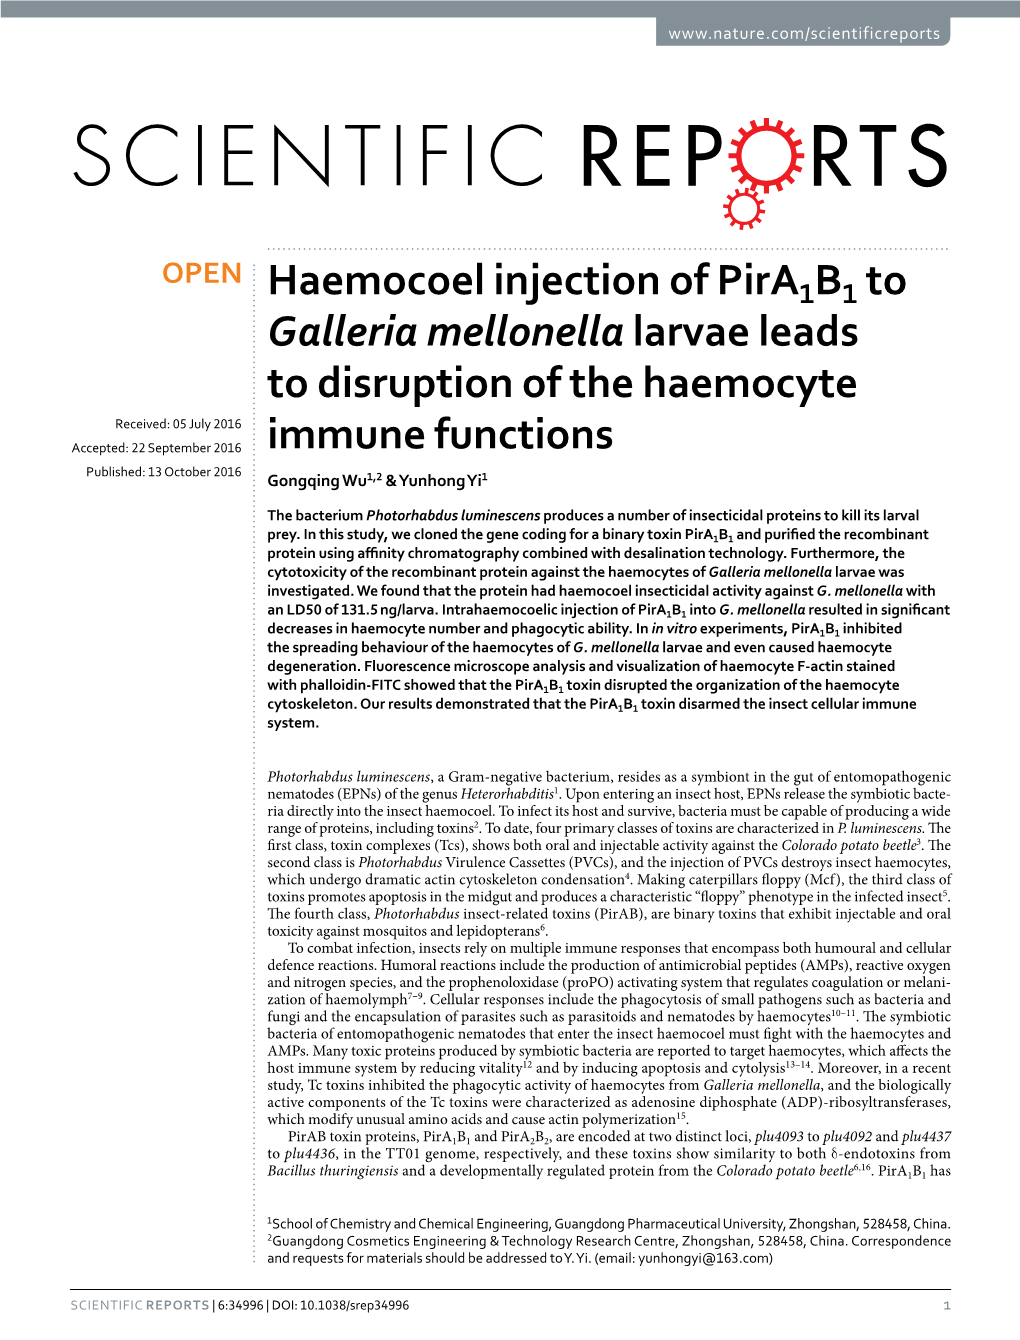 Haemocoel Injection of Pira1b1 to Galleria Mellonella Larvae Leads To